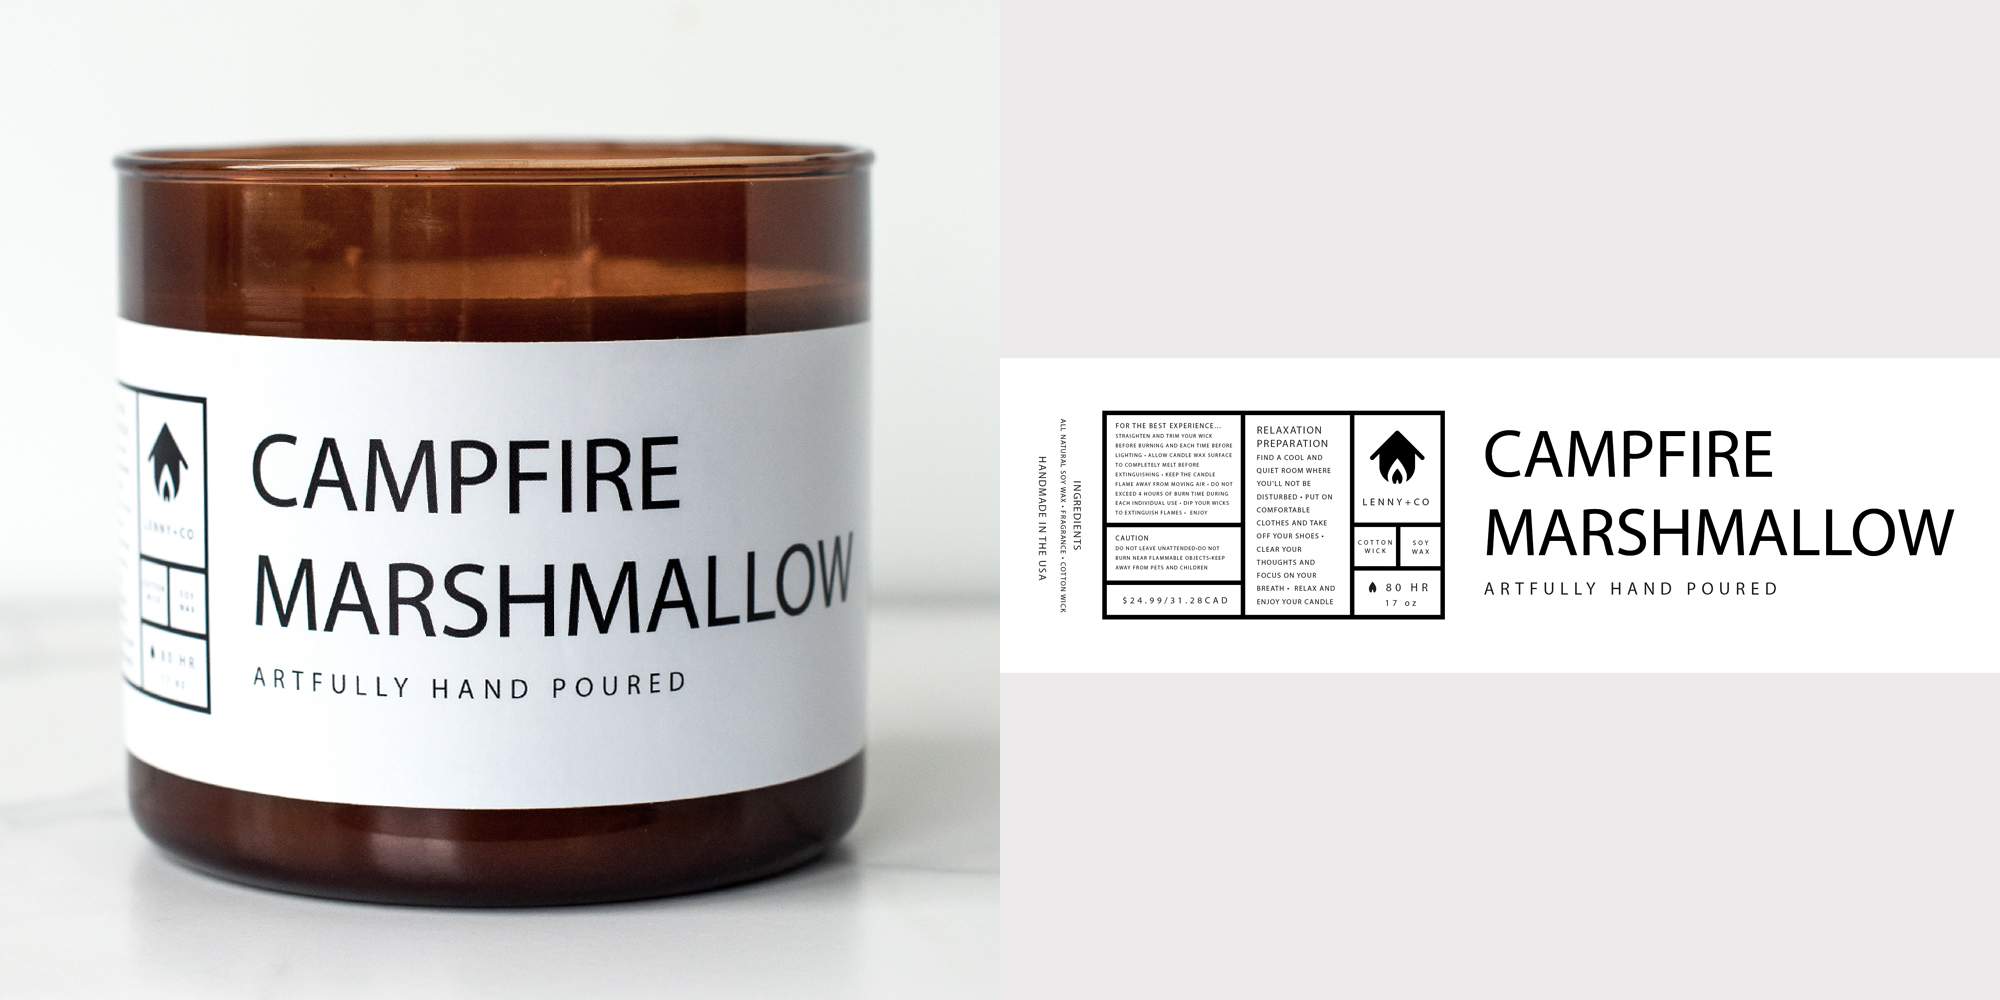 Campfire Marshmallow fragrance oil candle and label.